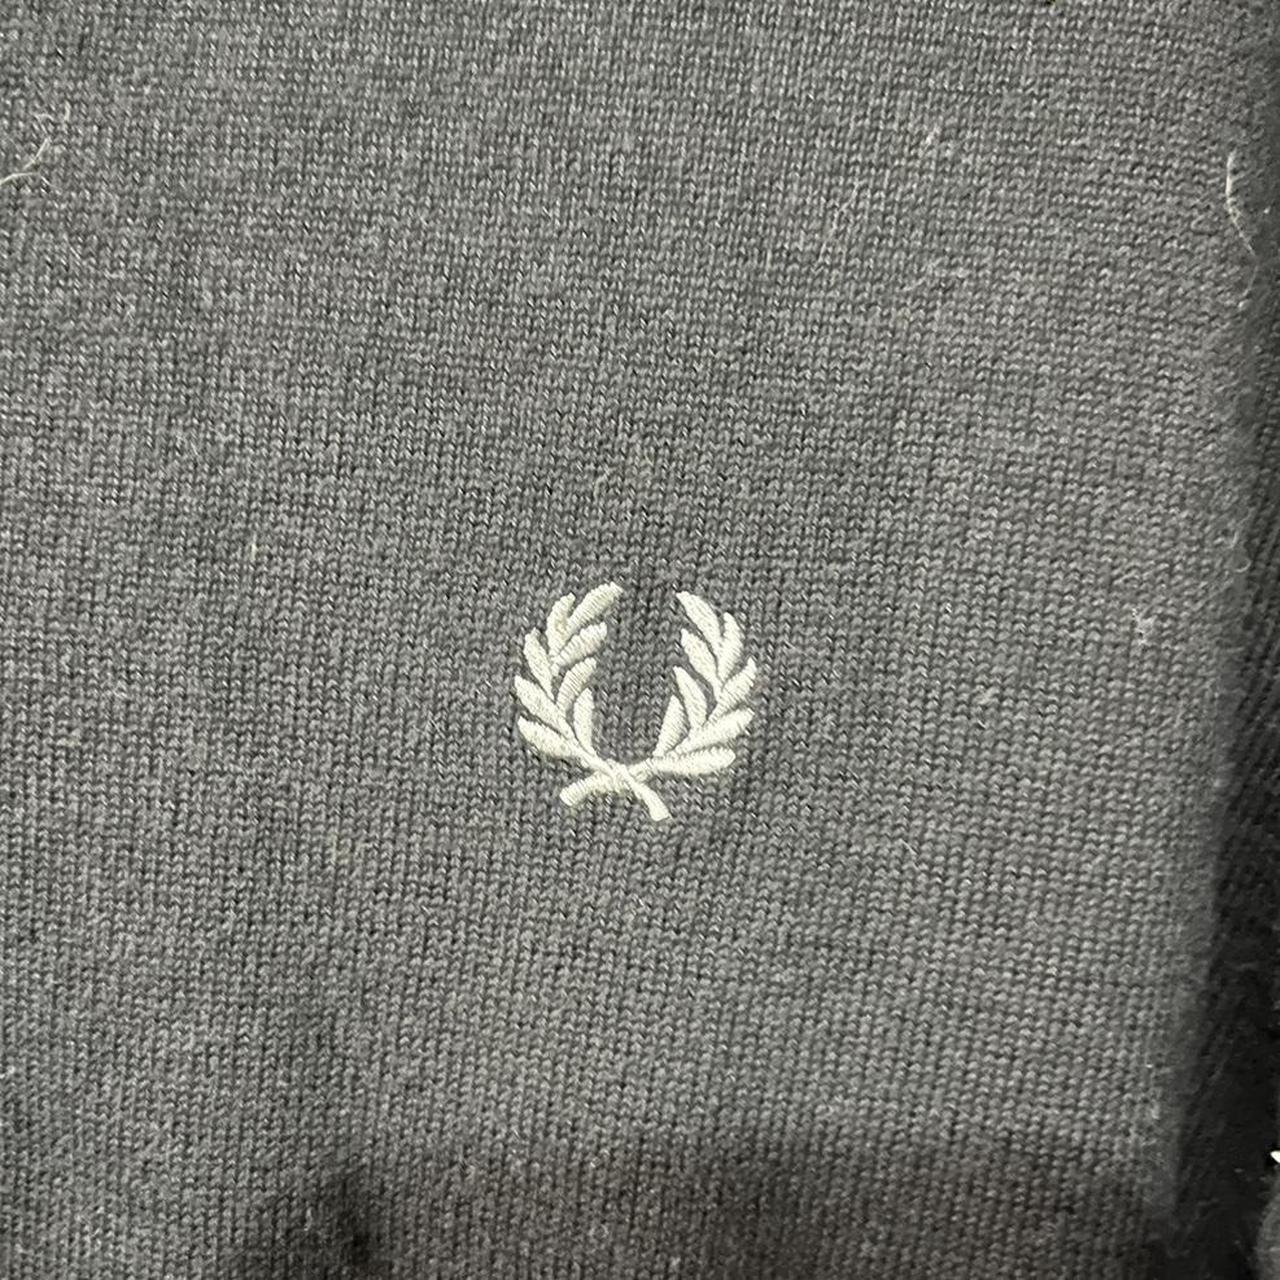 FRED PERRY BLACK XL V NECK SWEATER small bleach... - Depop